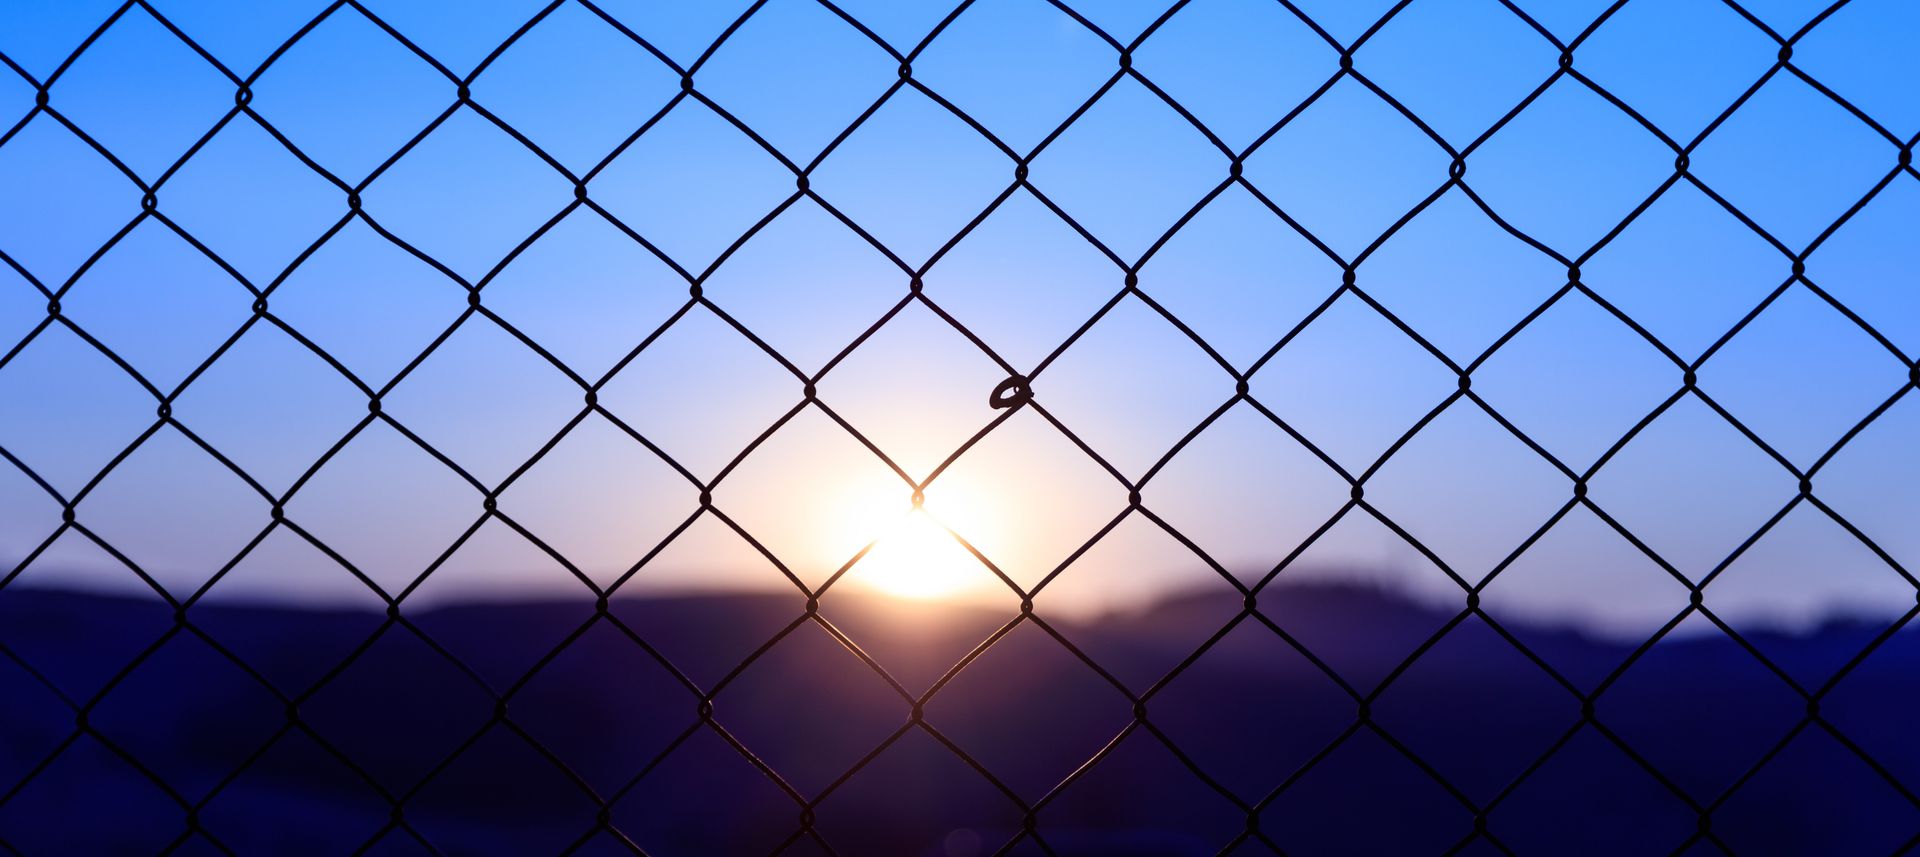 Chain-link; Fence; Choose